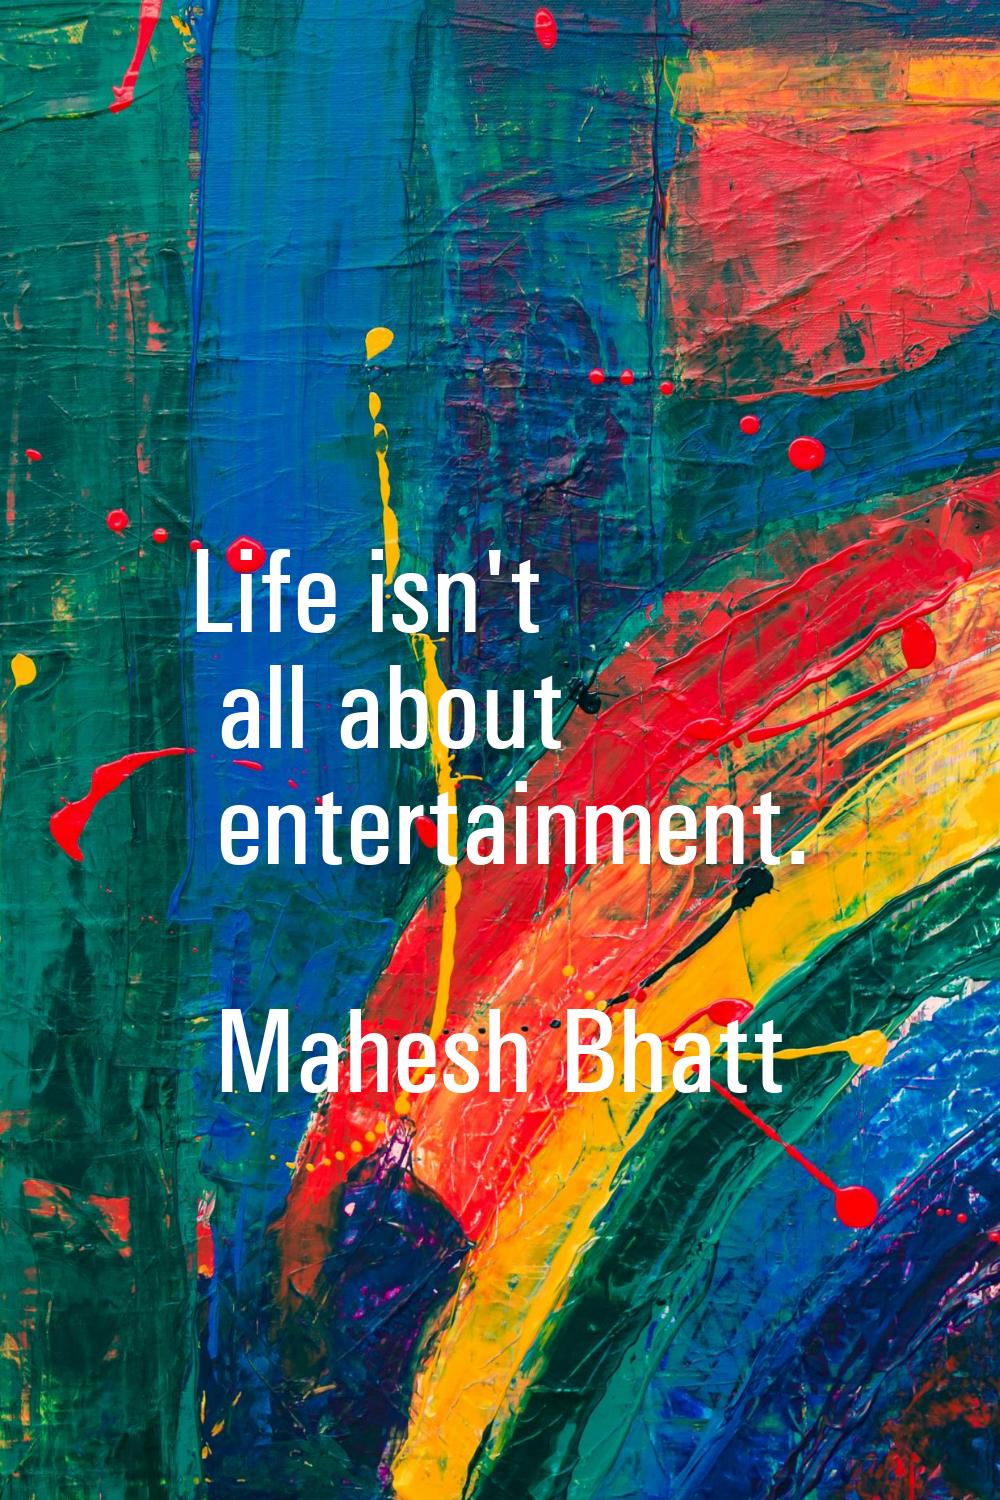 Life isn't all about entertainment.